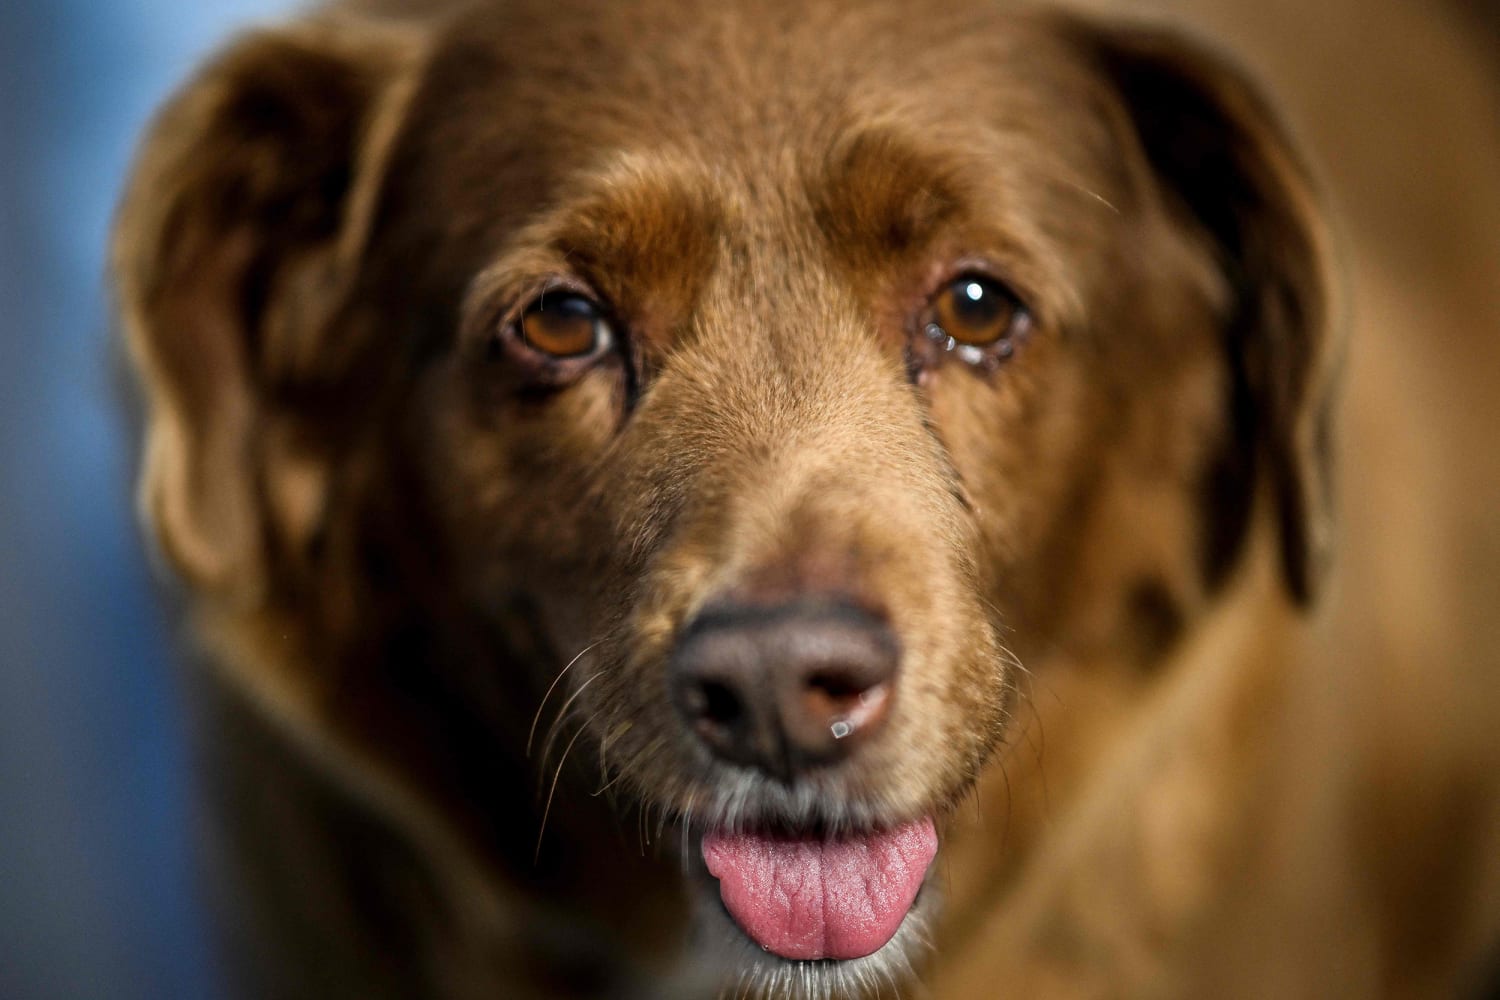 Bobby, the world’s oldest dog ever, has died at the age of 31